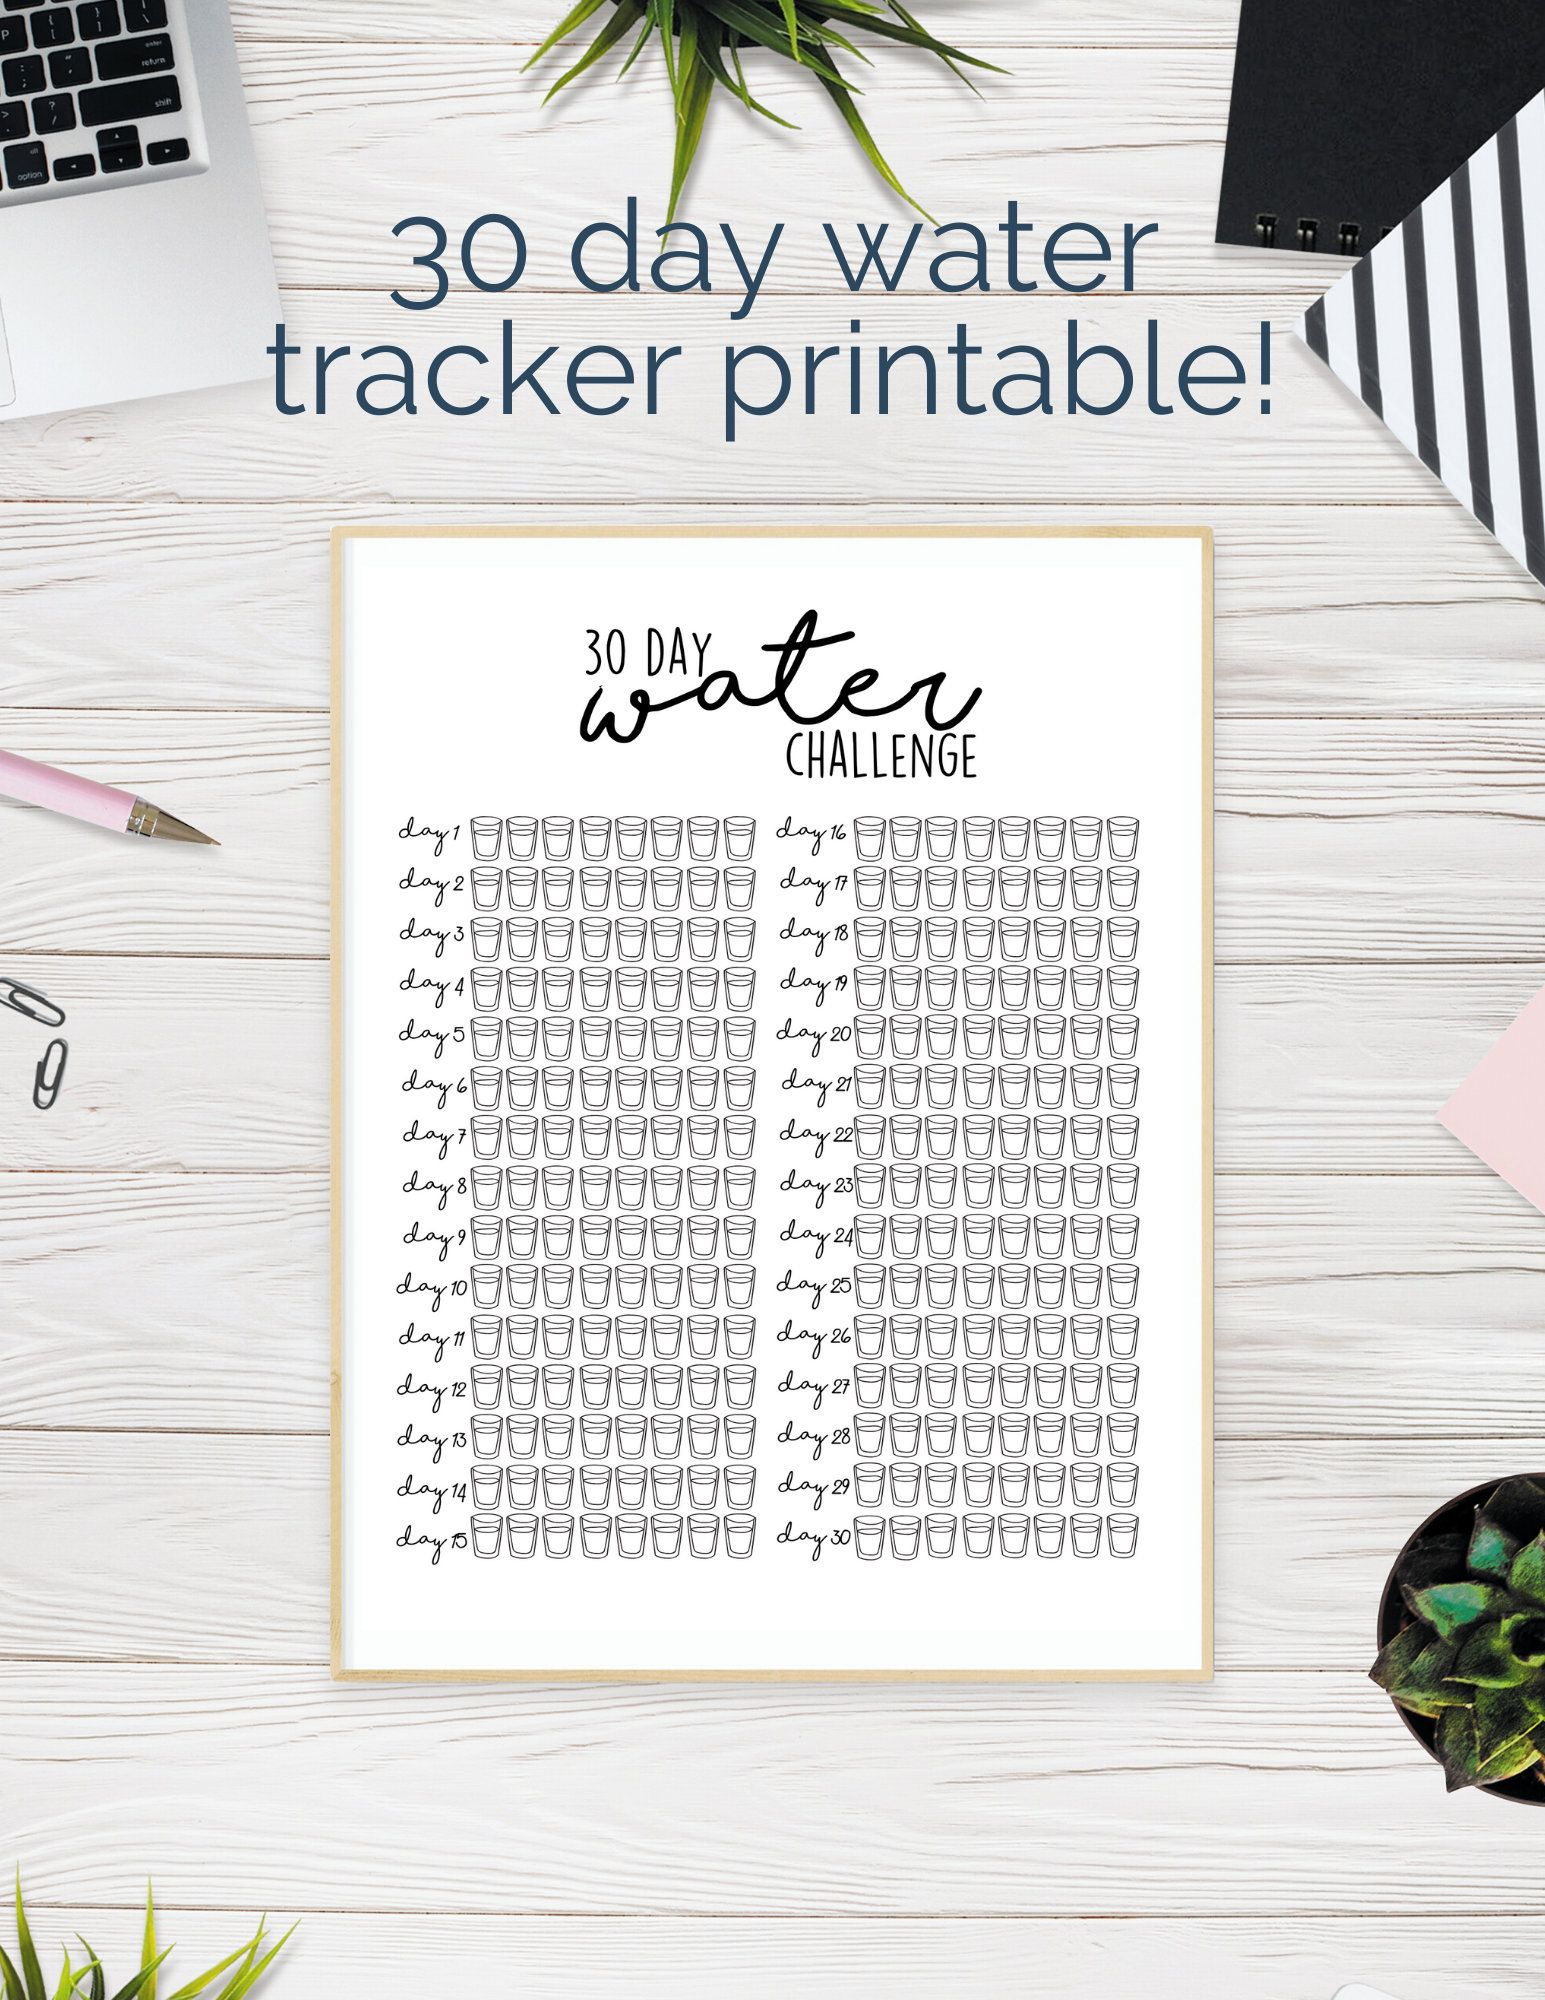 30 Day Water Challenge Printable | Water Intake Tracker In with regard to 30 Day Water Challenge Printable